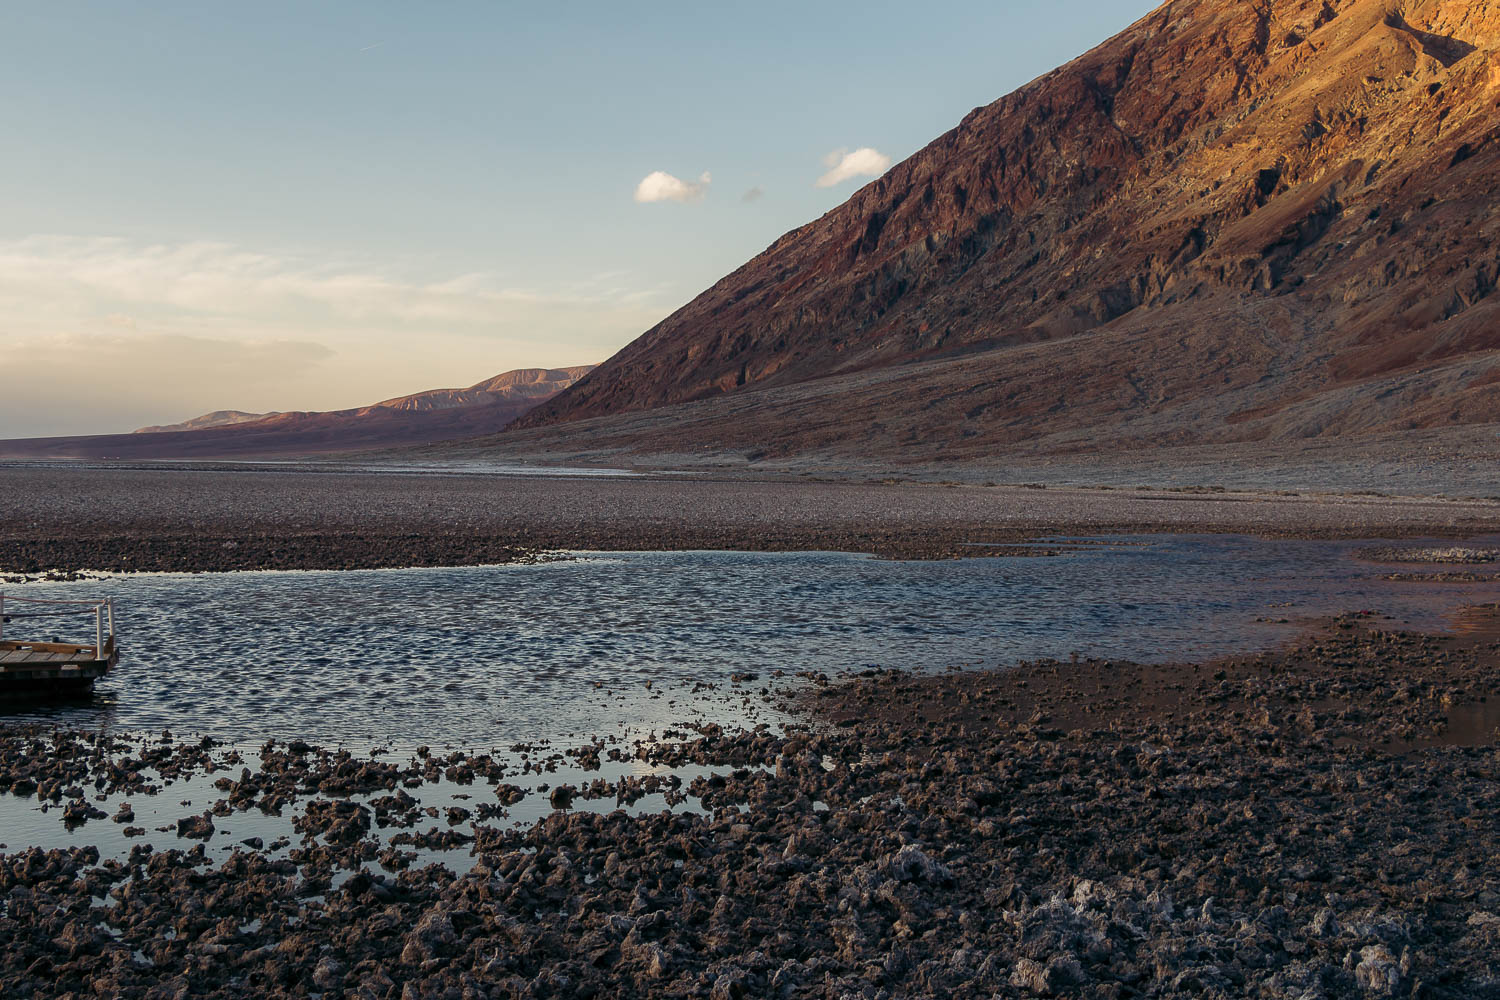 Lake Manly, a rare lake in Death Valley - Roads and Destinations